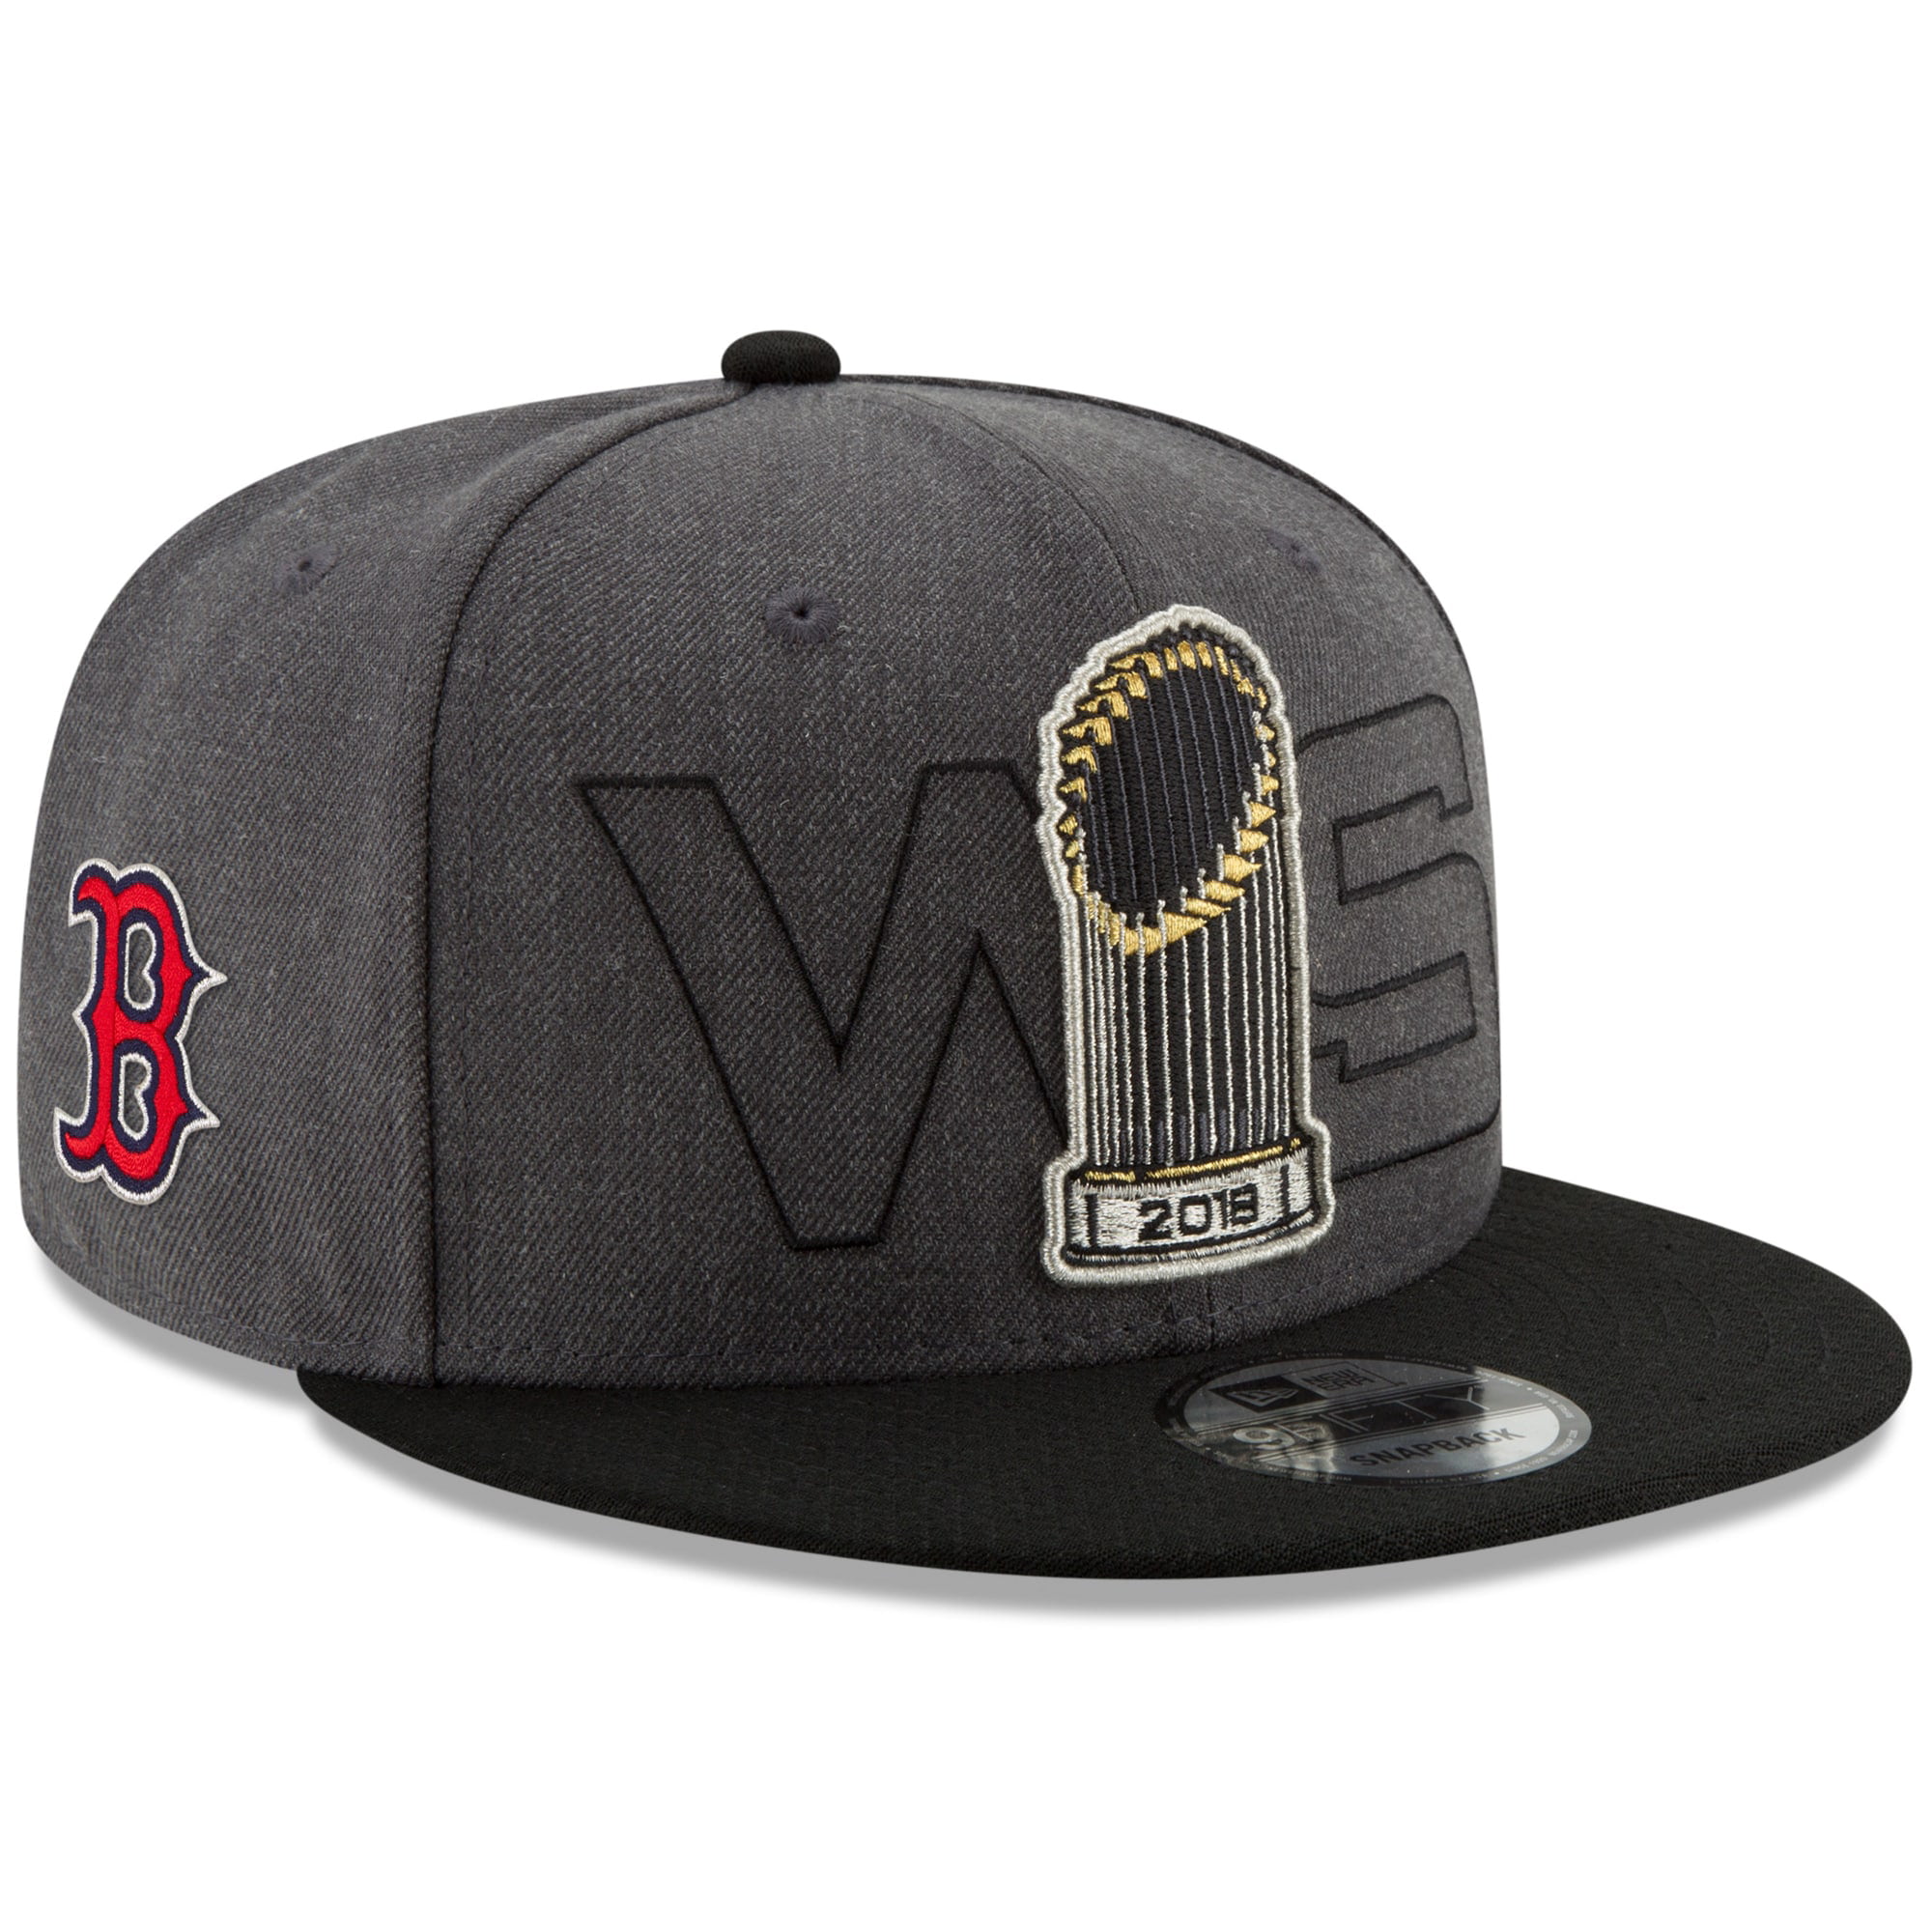 red sox world series hat